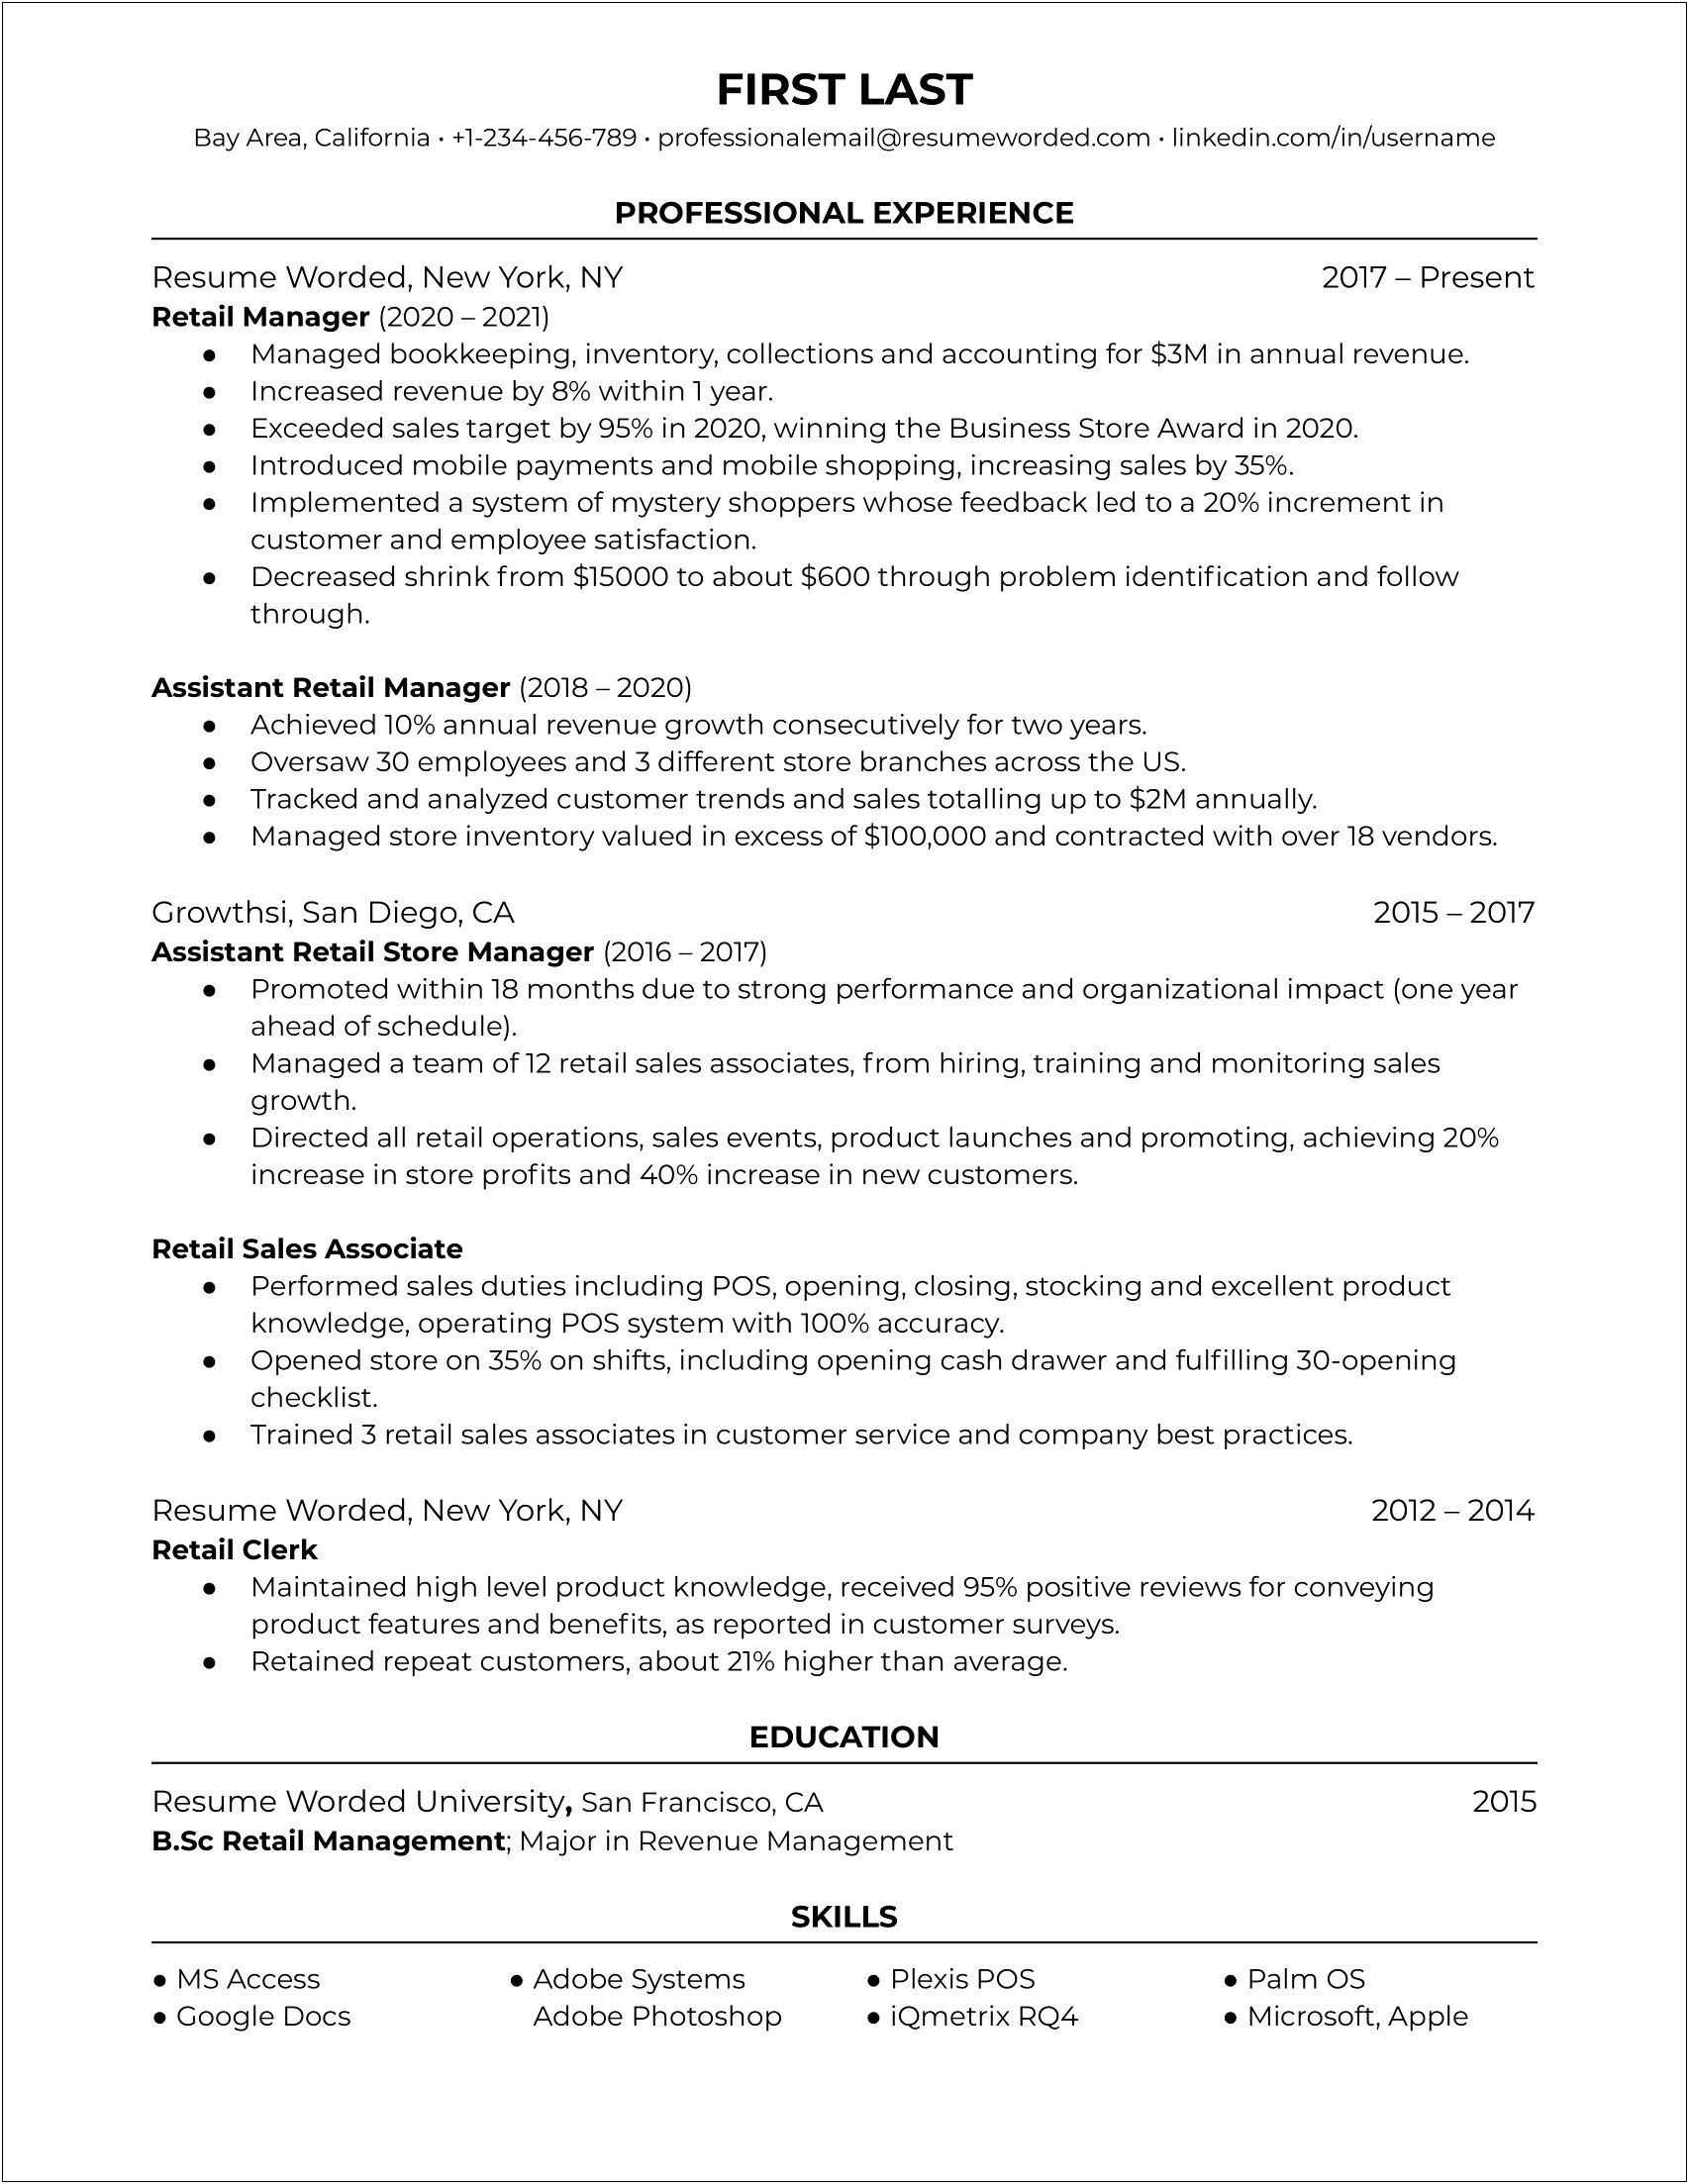 Resume Objective For A Retail Position